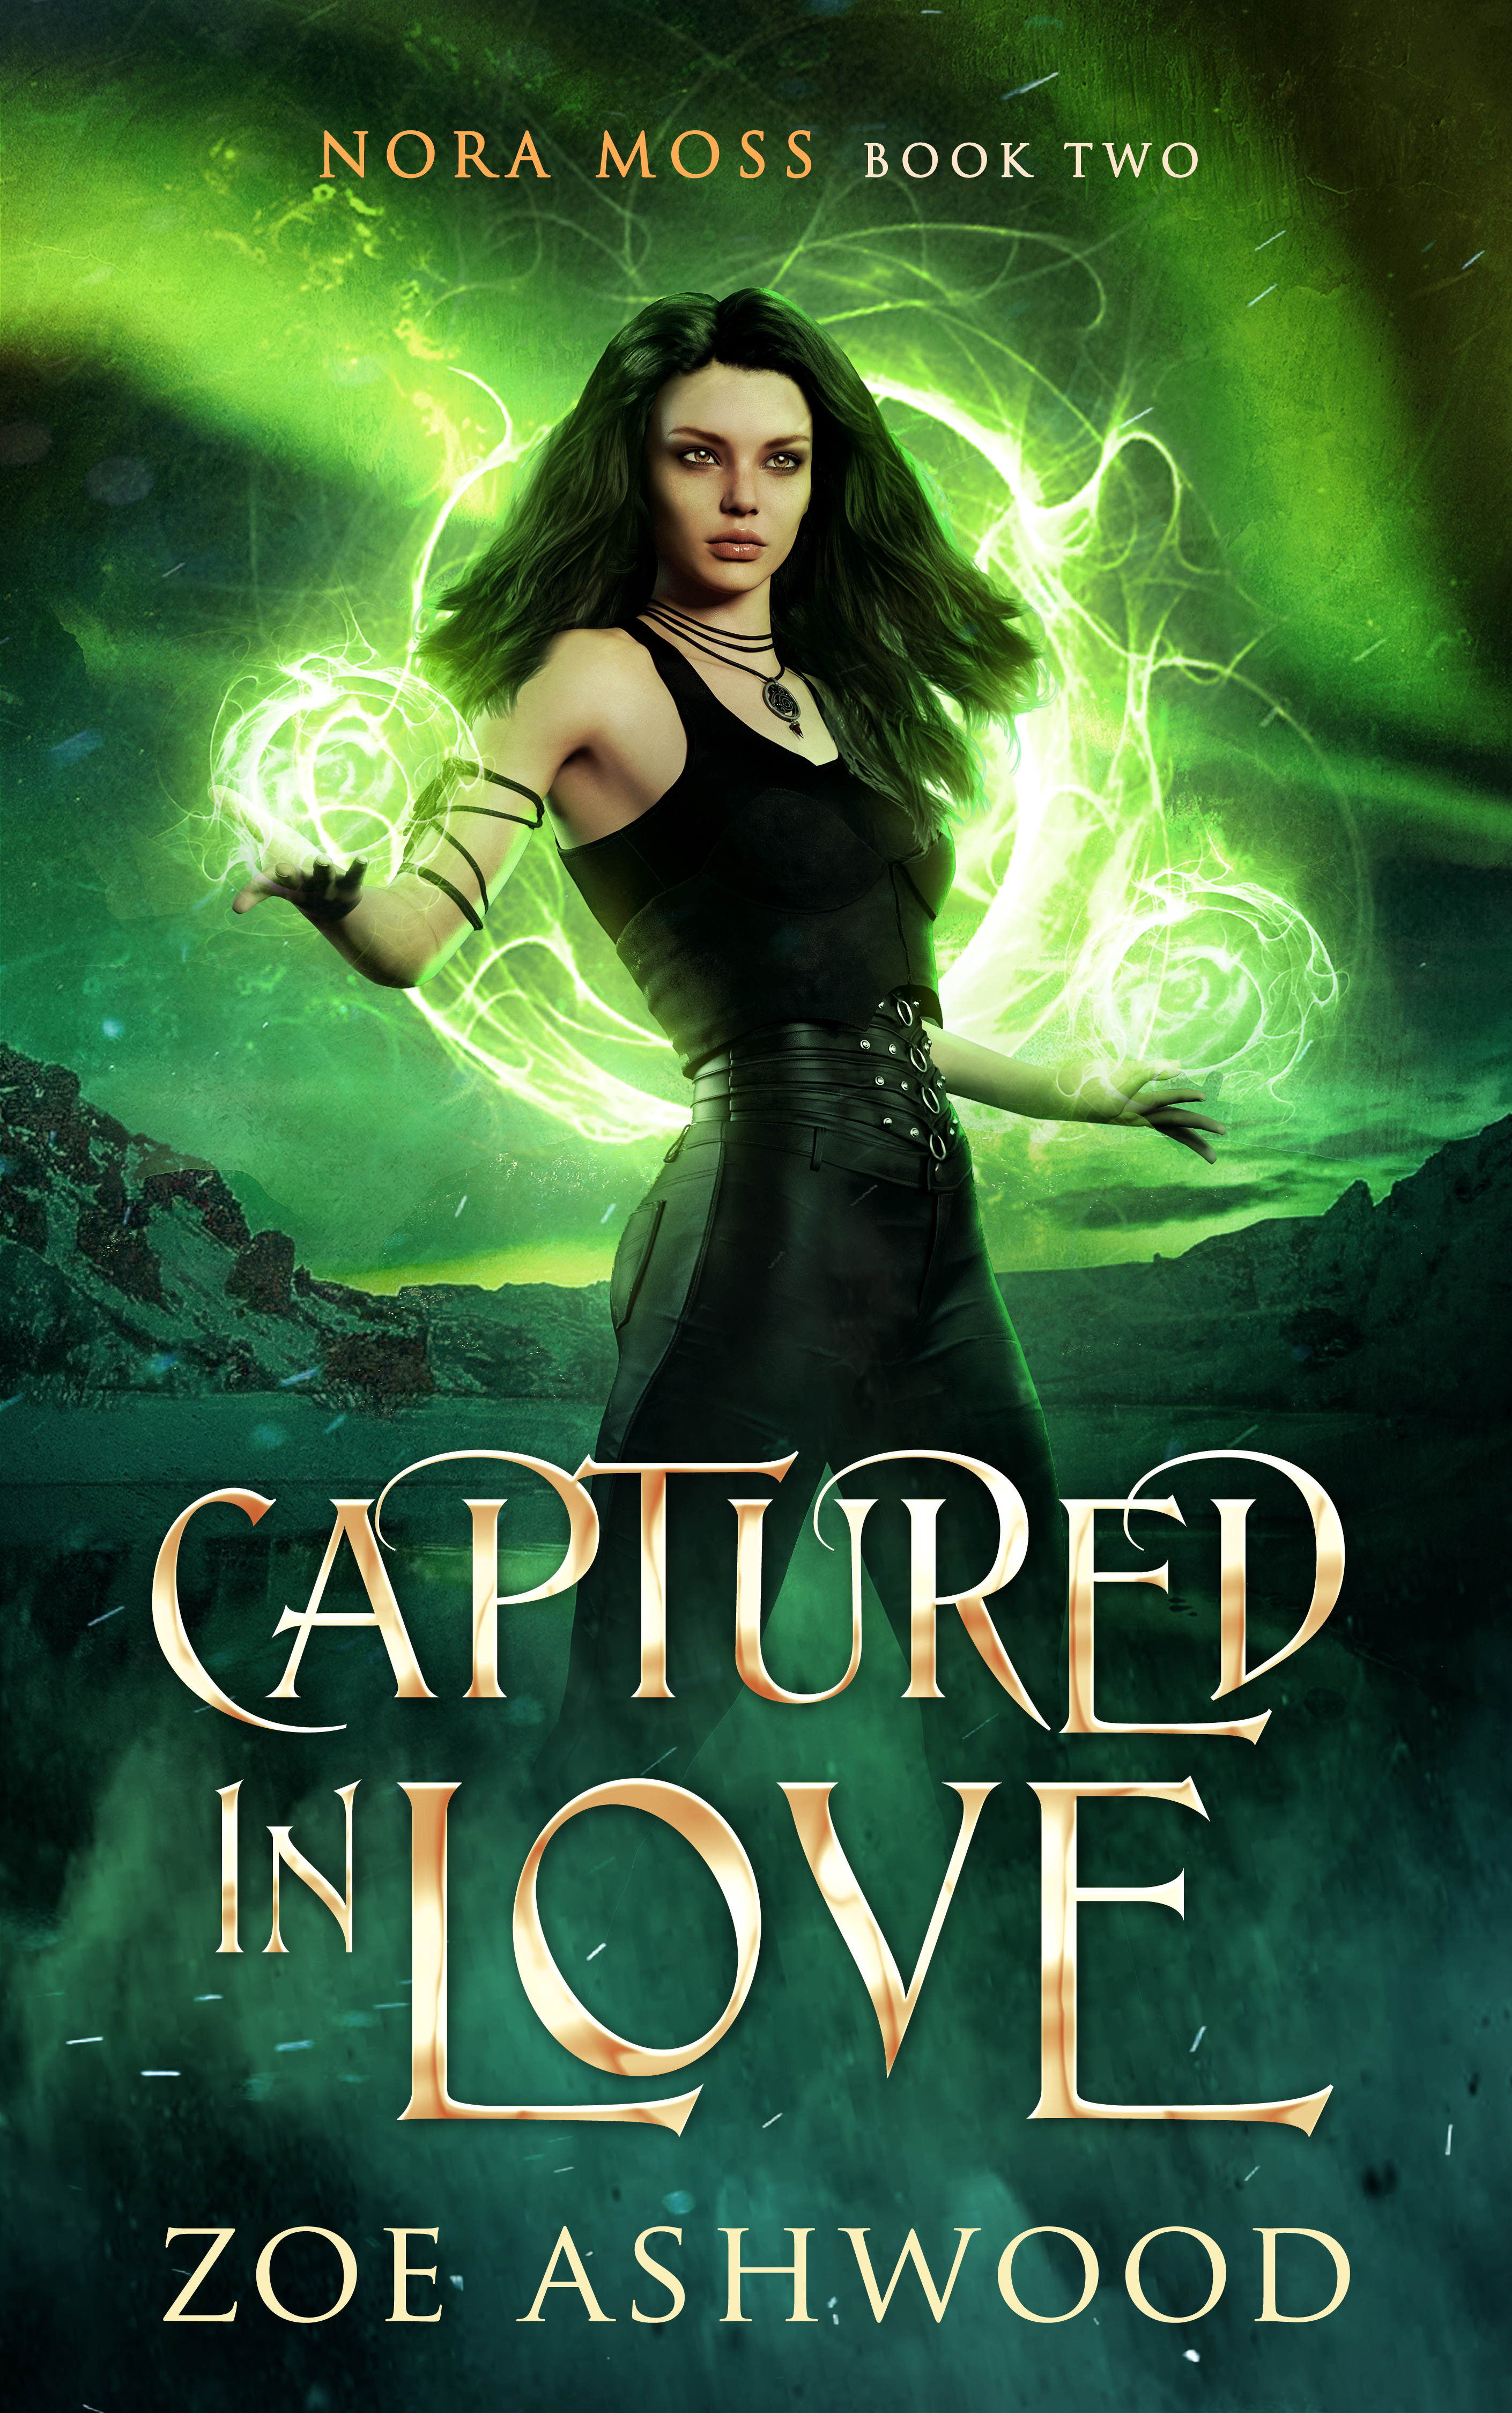 Captured in Love by Zoe Ashwood - Nora Moss #2 - reverse harem paranormal romance